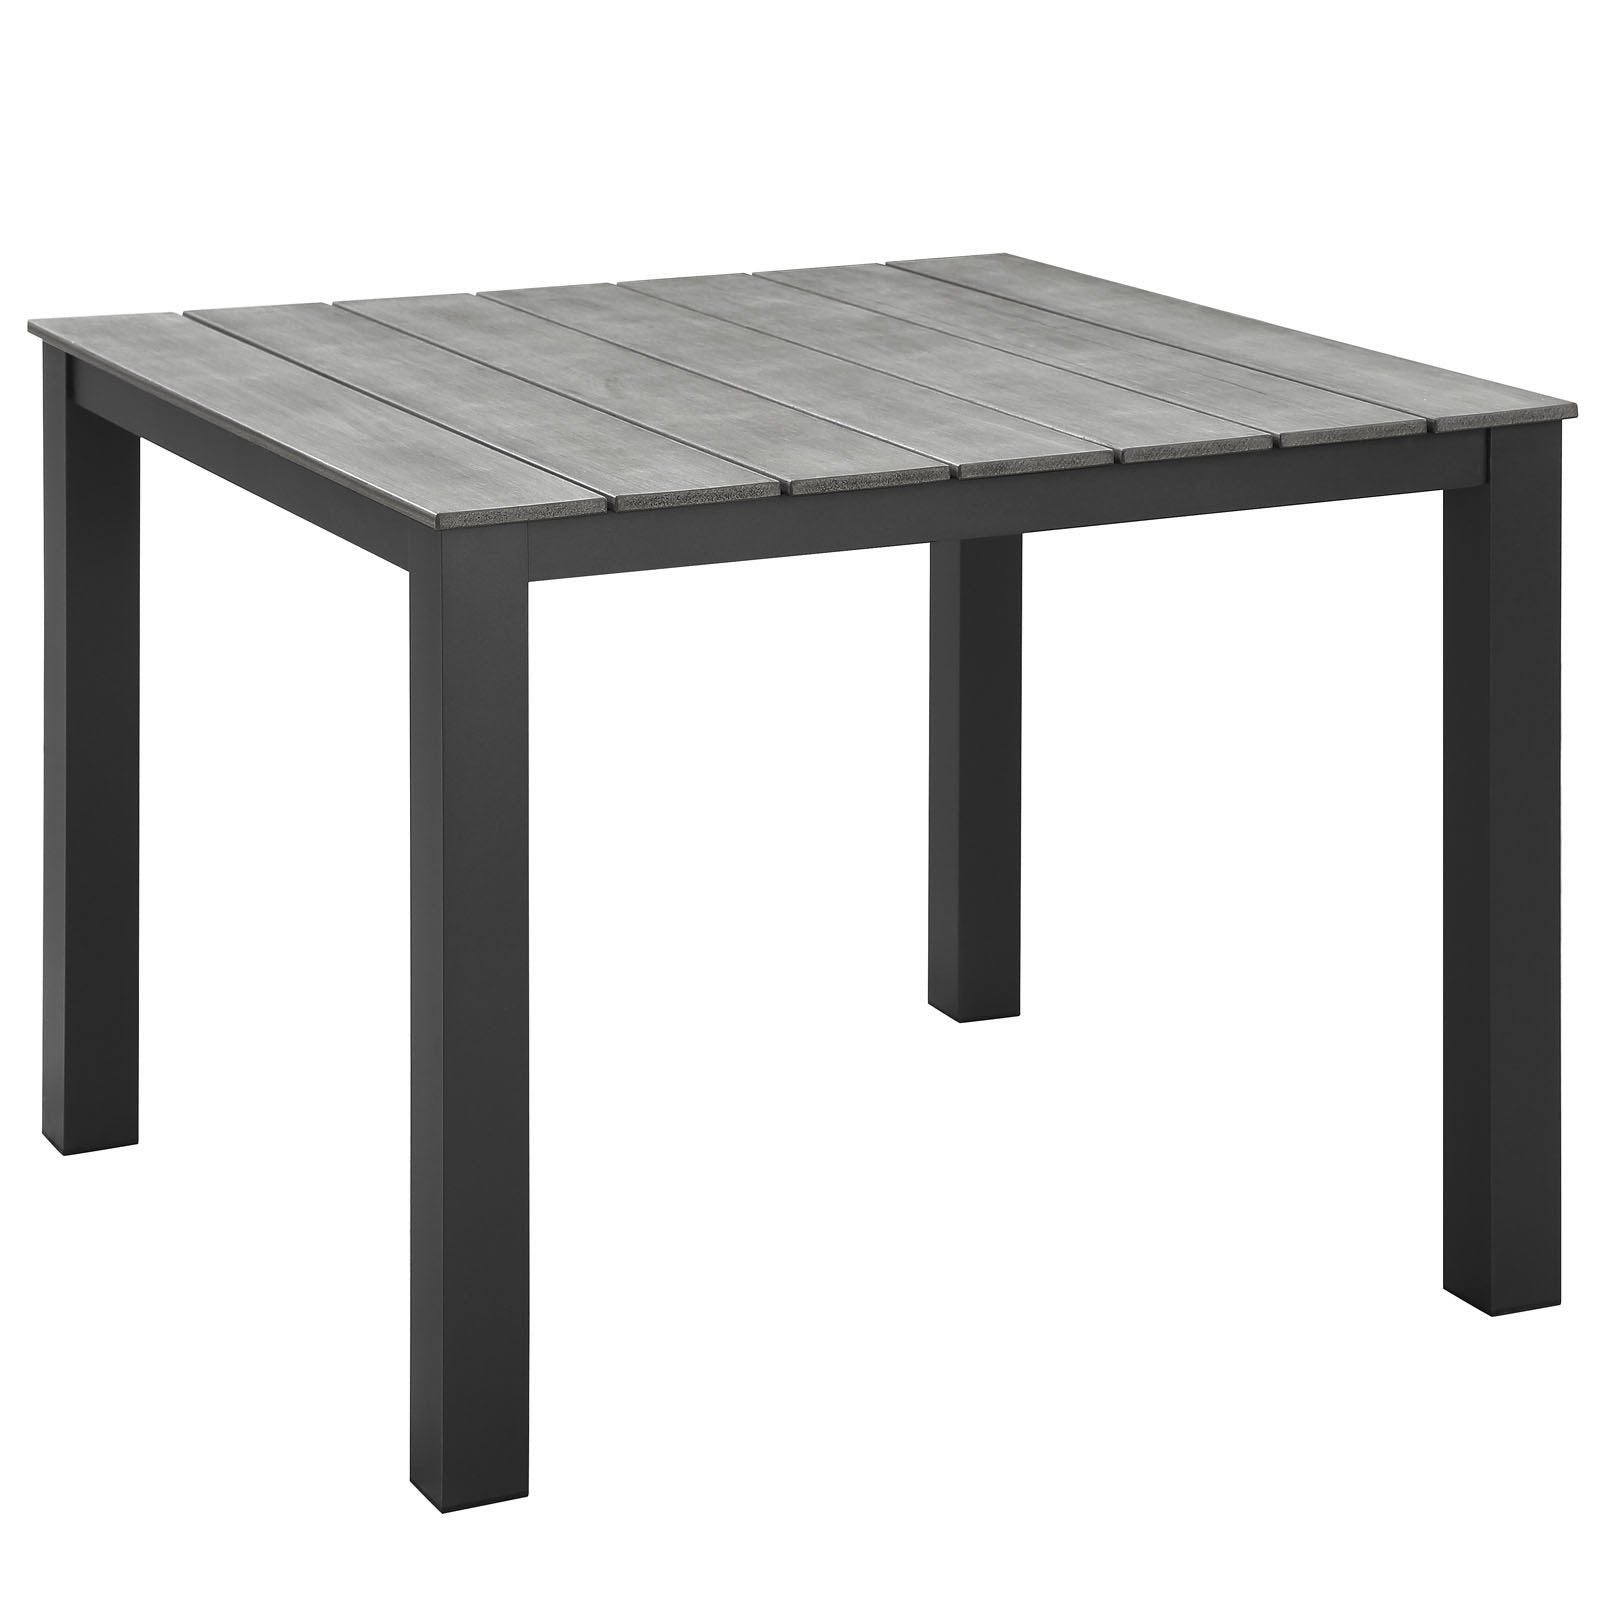 Morocco 40" Outdoor Patio Dining Table - living-essentials